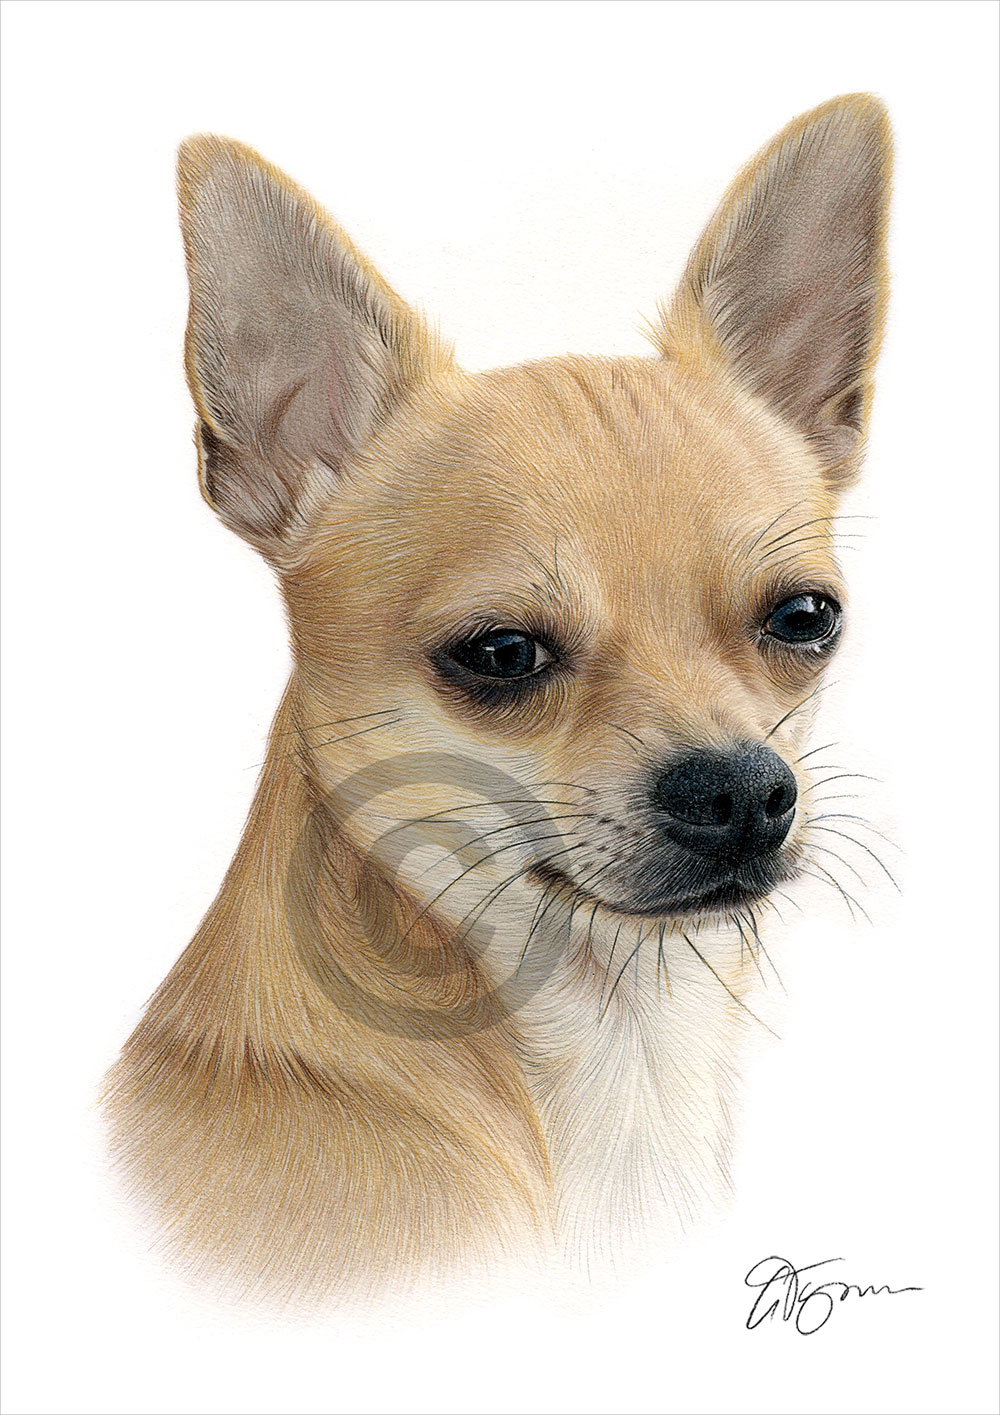 Colour pencil drawing of a short-haired Chihuahua by artist Gary Tymon